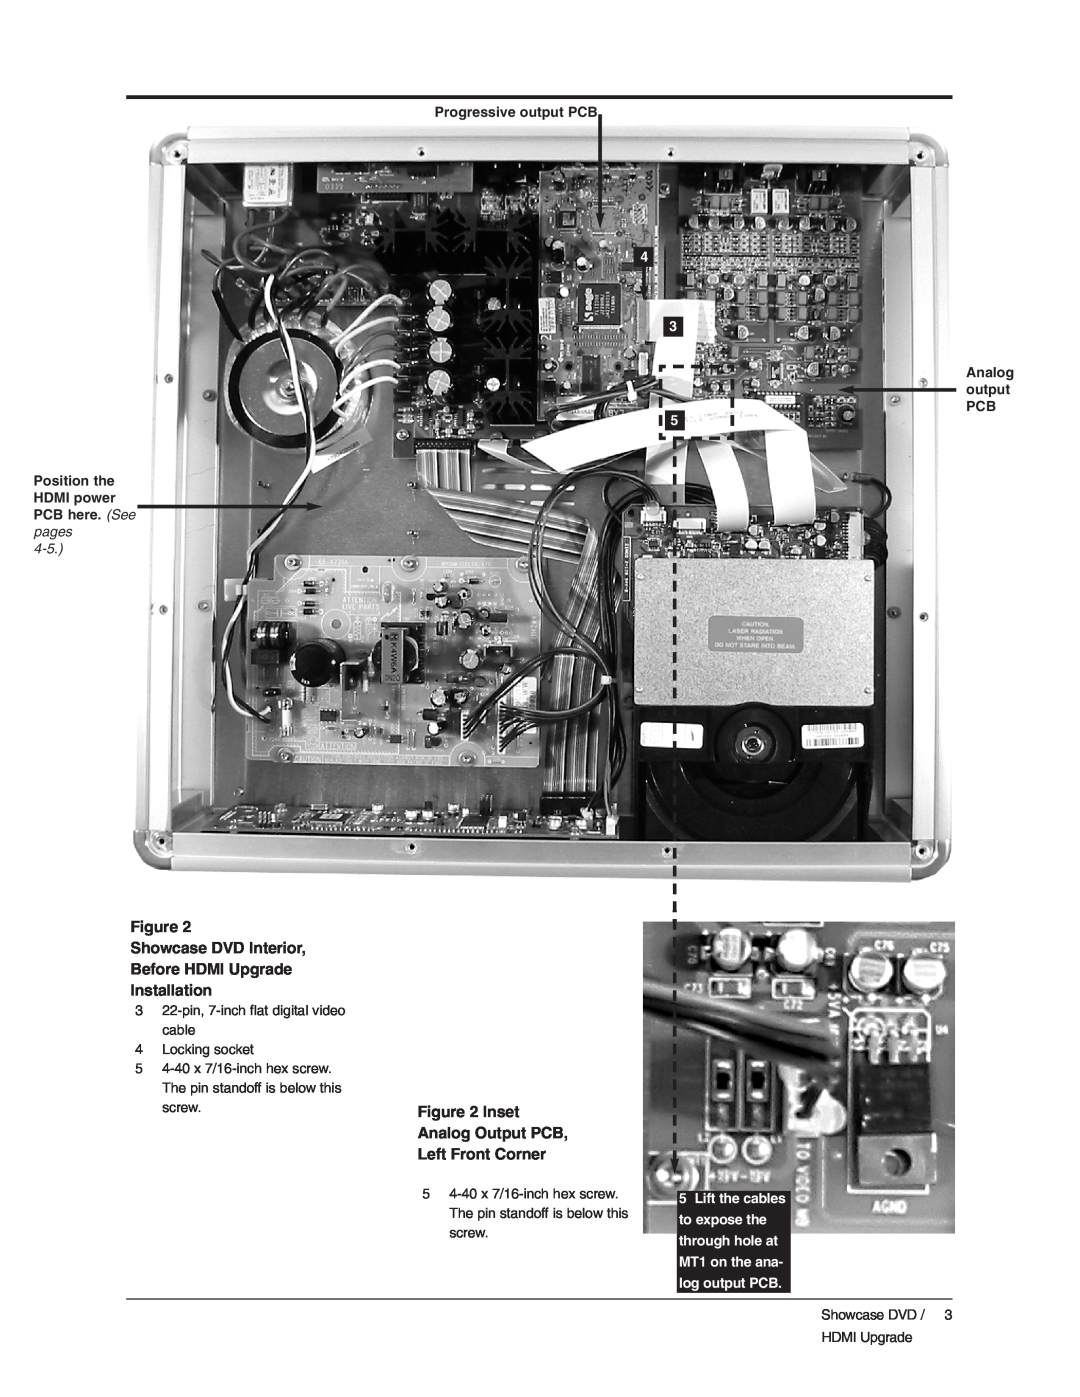 Krell Industries DVD Player manual Showcase DVD Interior Before HDMI Upgrade Installation, Progressive output PCB 